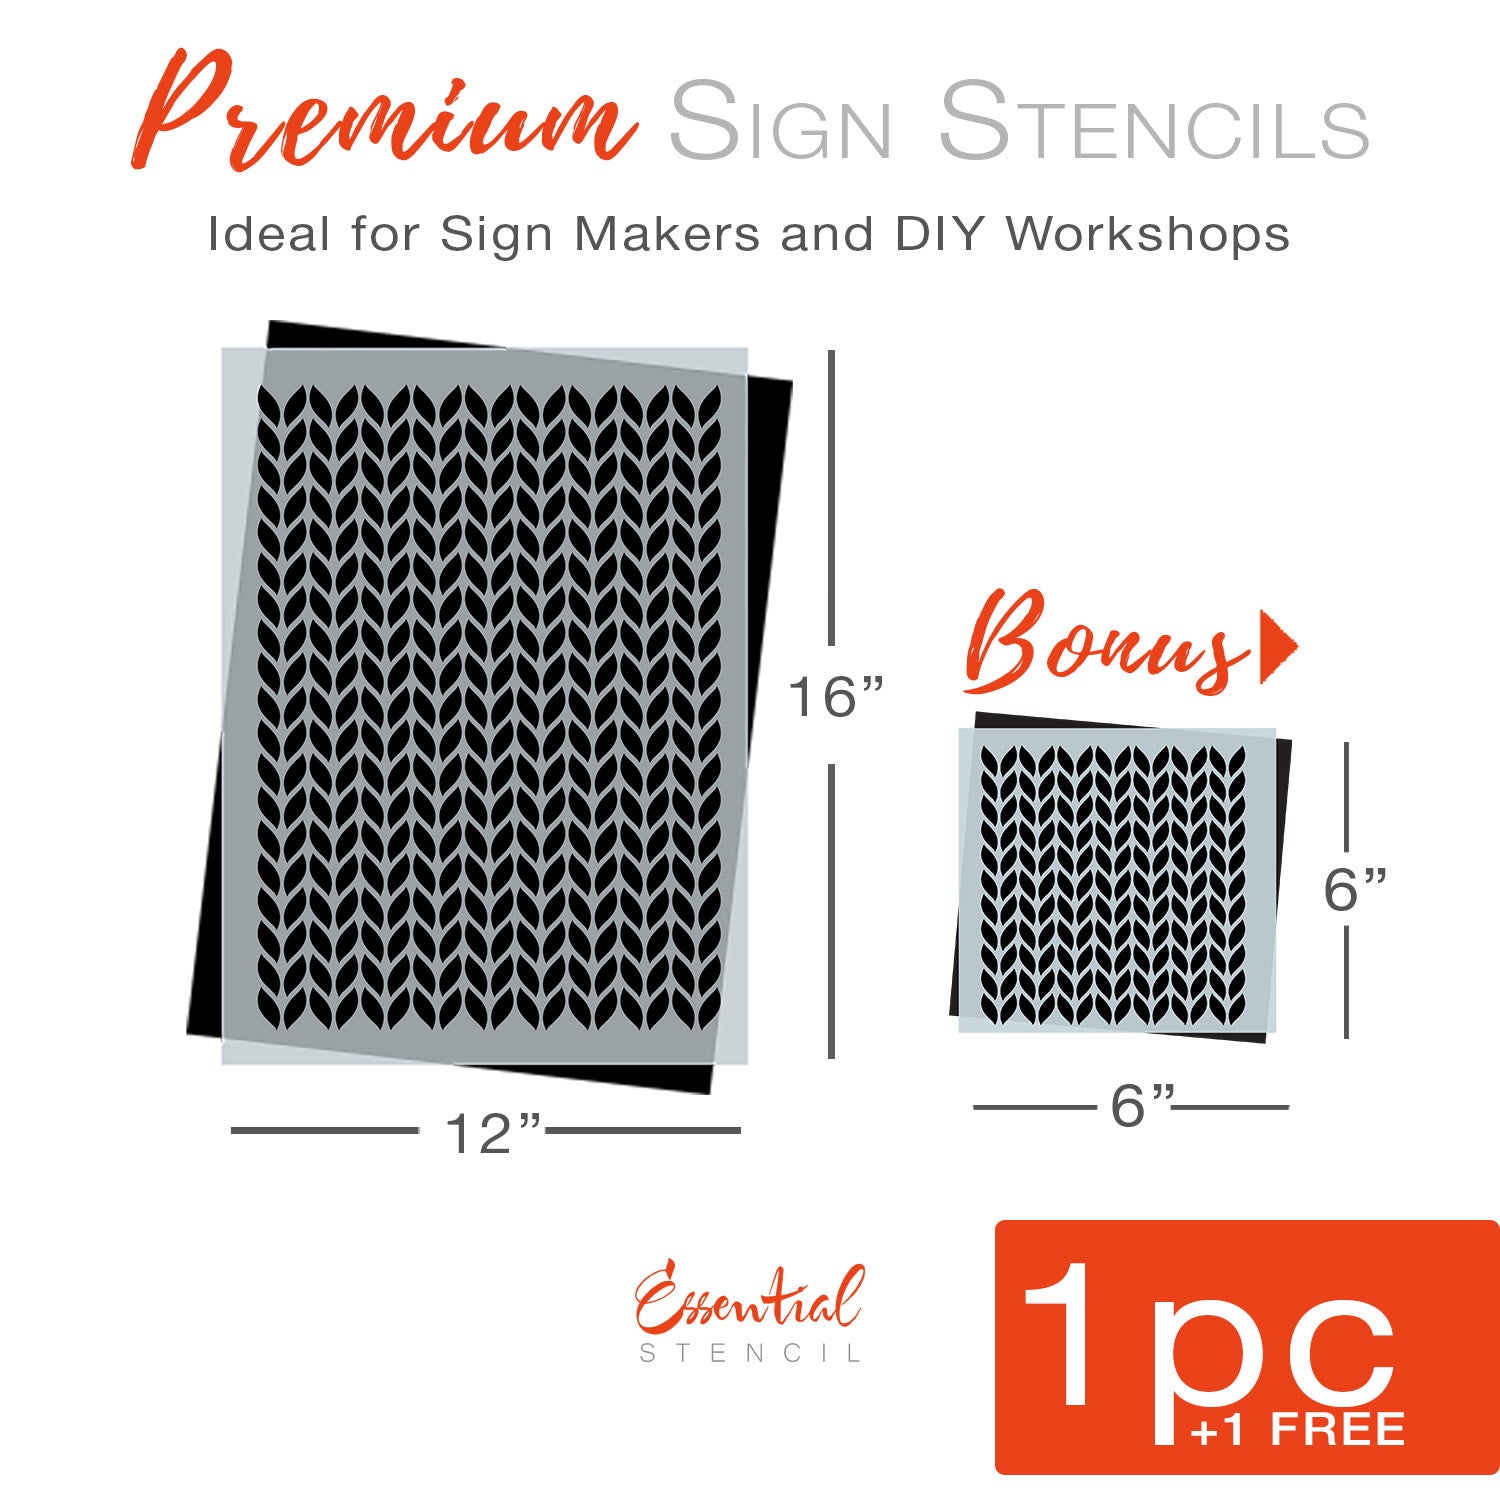 How To Get Crisp Lines When Stenciling With Vinyl - Board & Batten Design  Co.